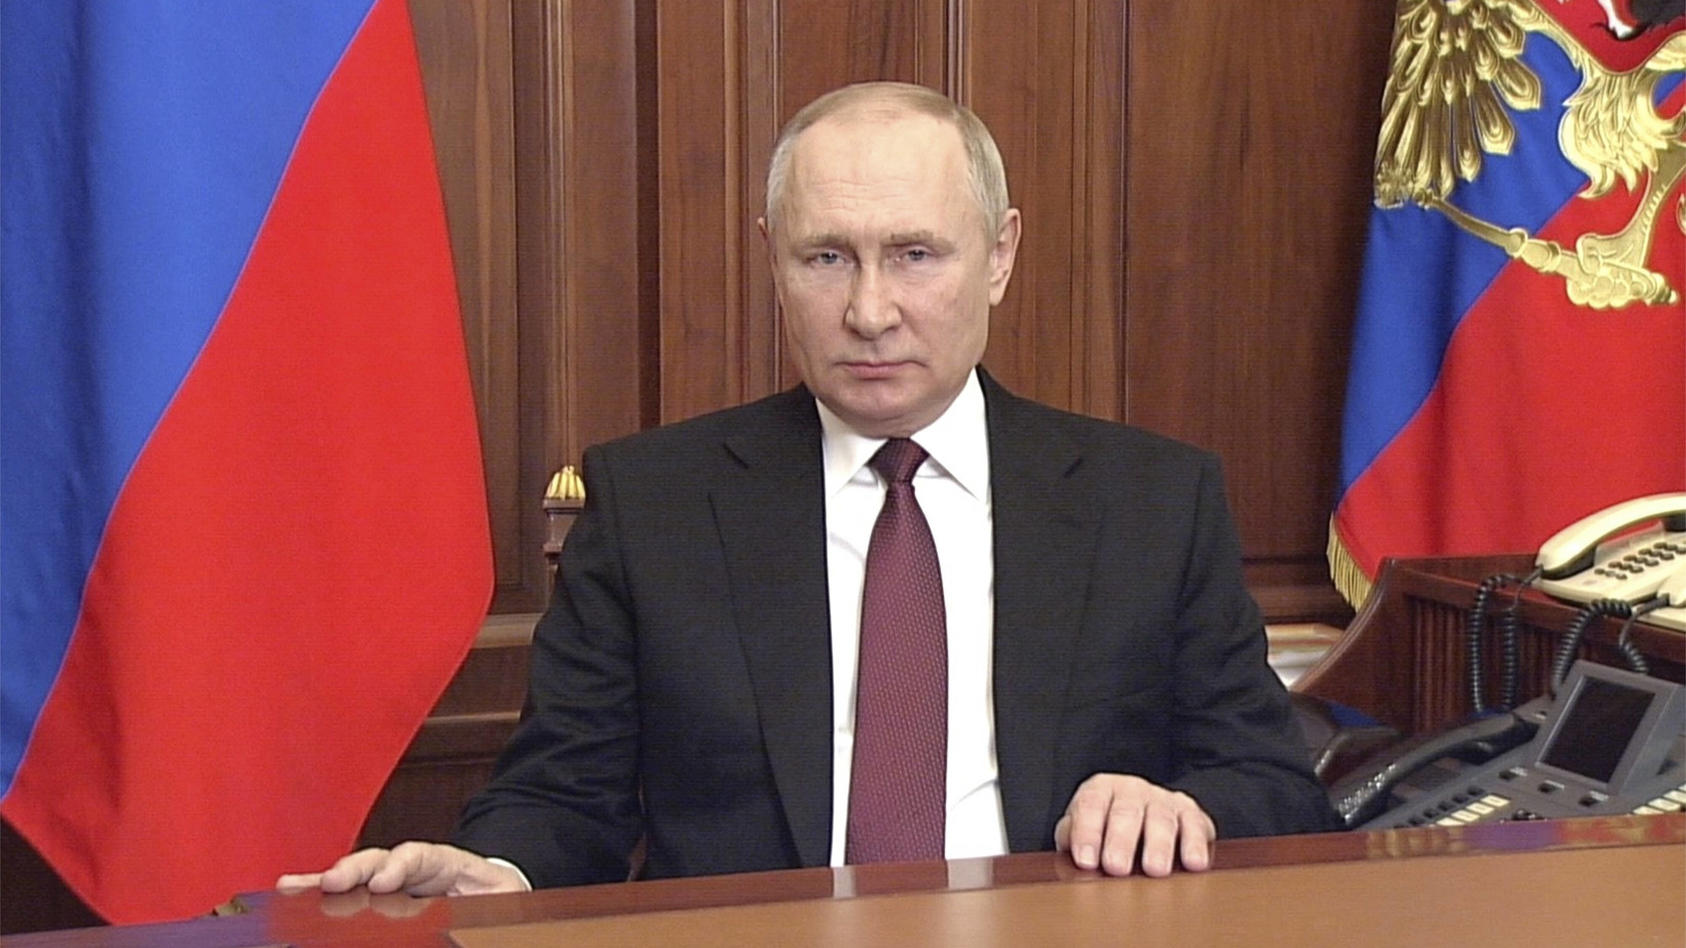  February 24, 2022, Moscow, Moscow Oblast, Russia: Russian President Vladimir Putin delivers an address to the Russian people announcing the invasion of Ukraine from the Kremlin, February 24, 2022 in Moscow, Russia. Moscow Russia - ZUMAp138 20220224_